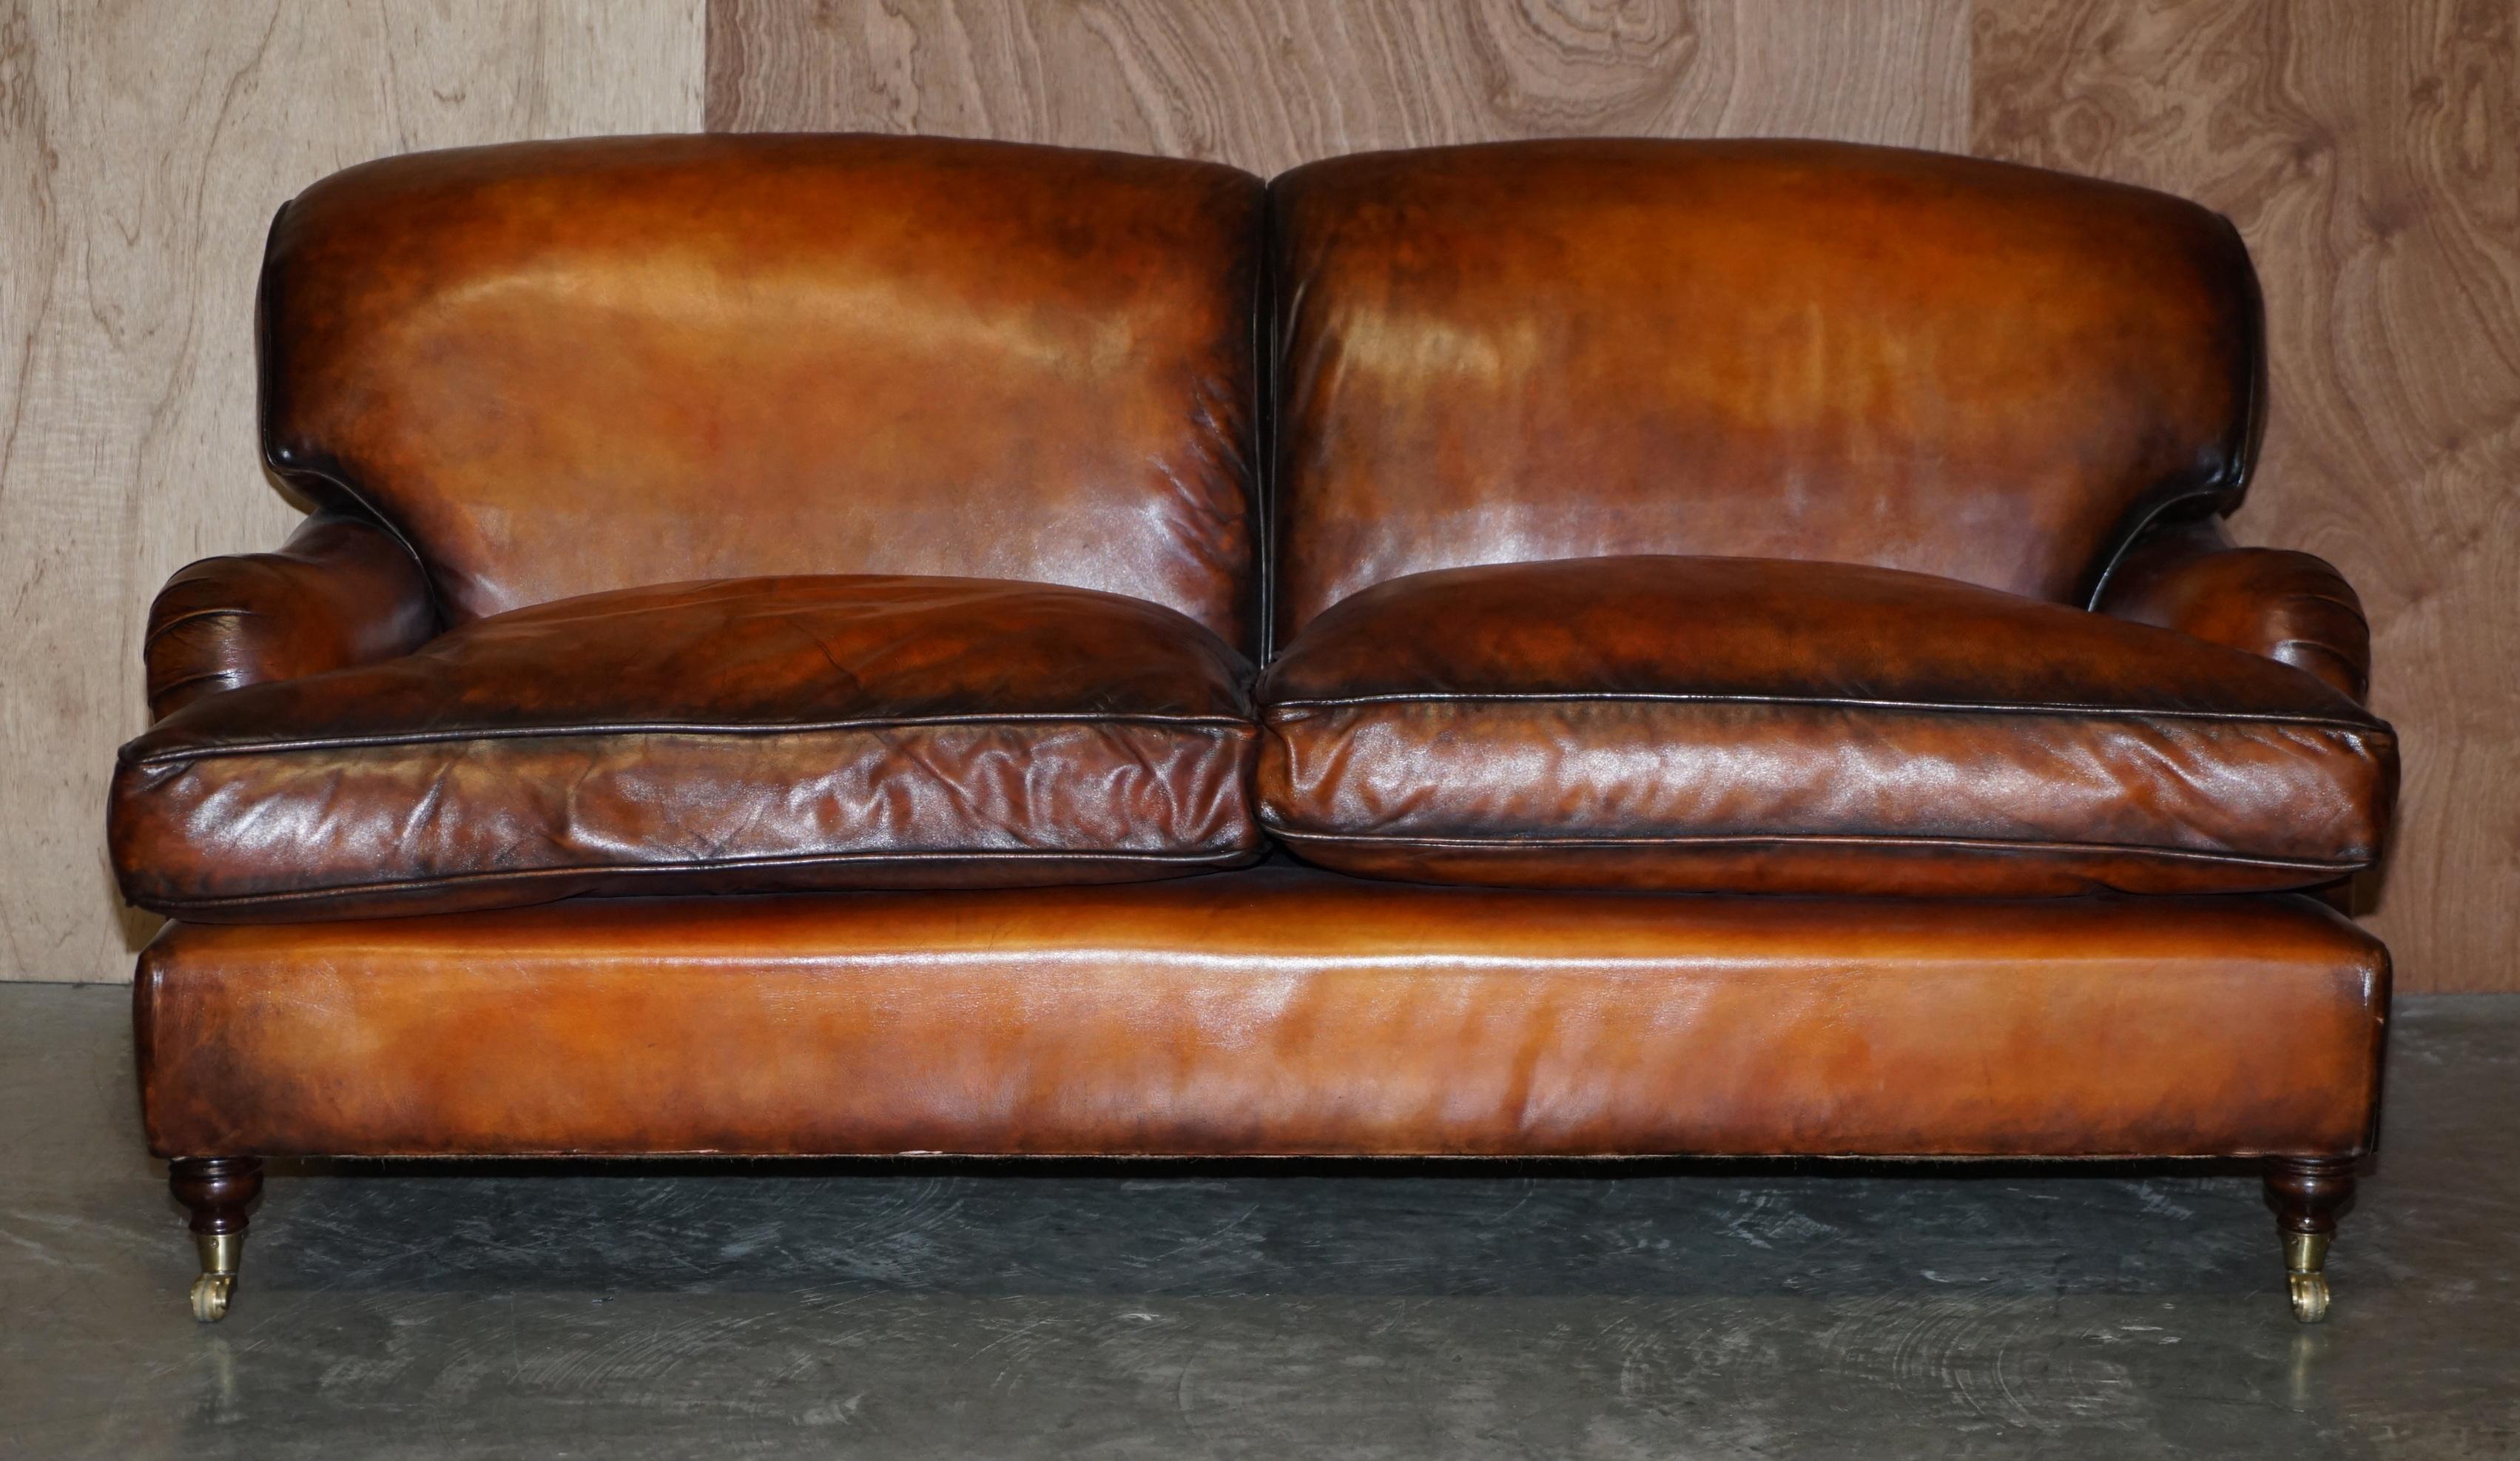 We are delighted to offer for sale this lovely vintage fully restored hand dyed brown leather Howard & Son’s style three seat sofa with overstuffed feather filled cushions

I have a matching three seat sofa which is listed under my other items,